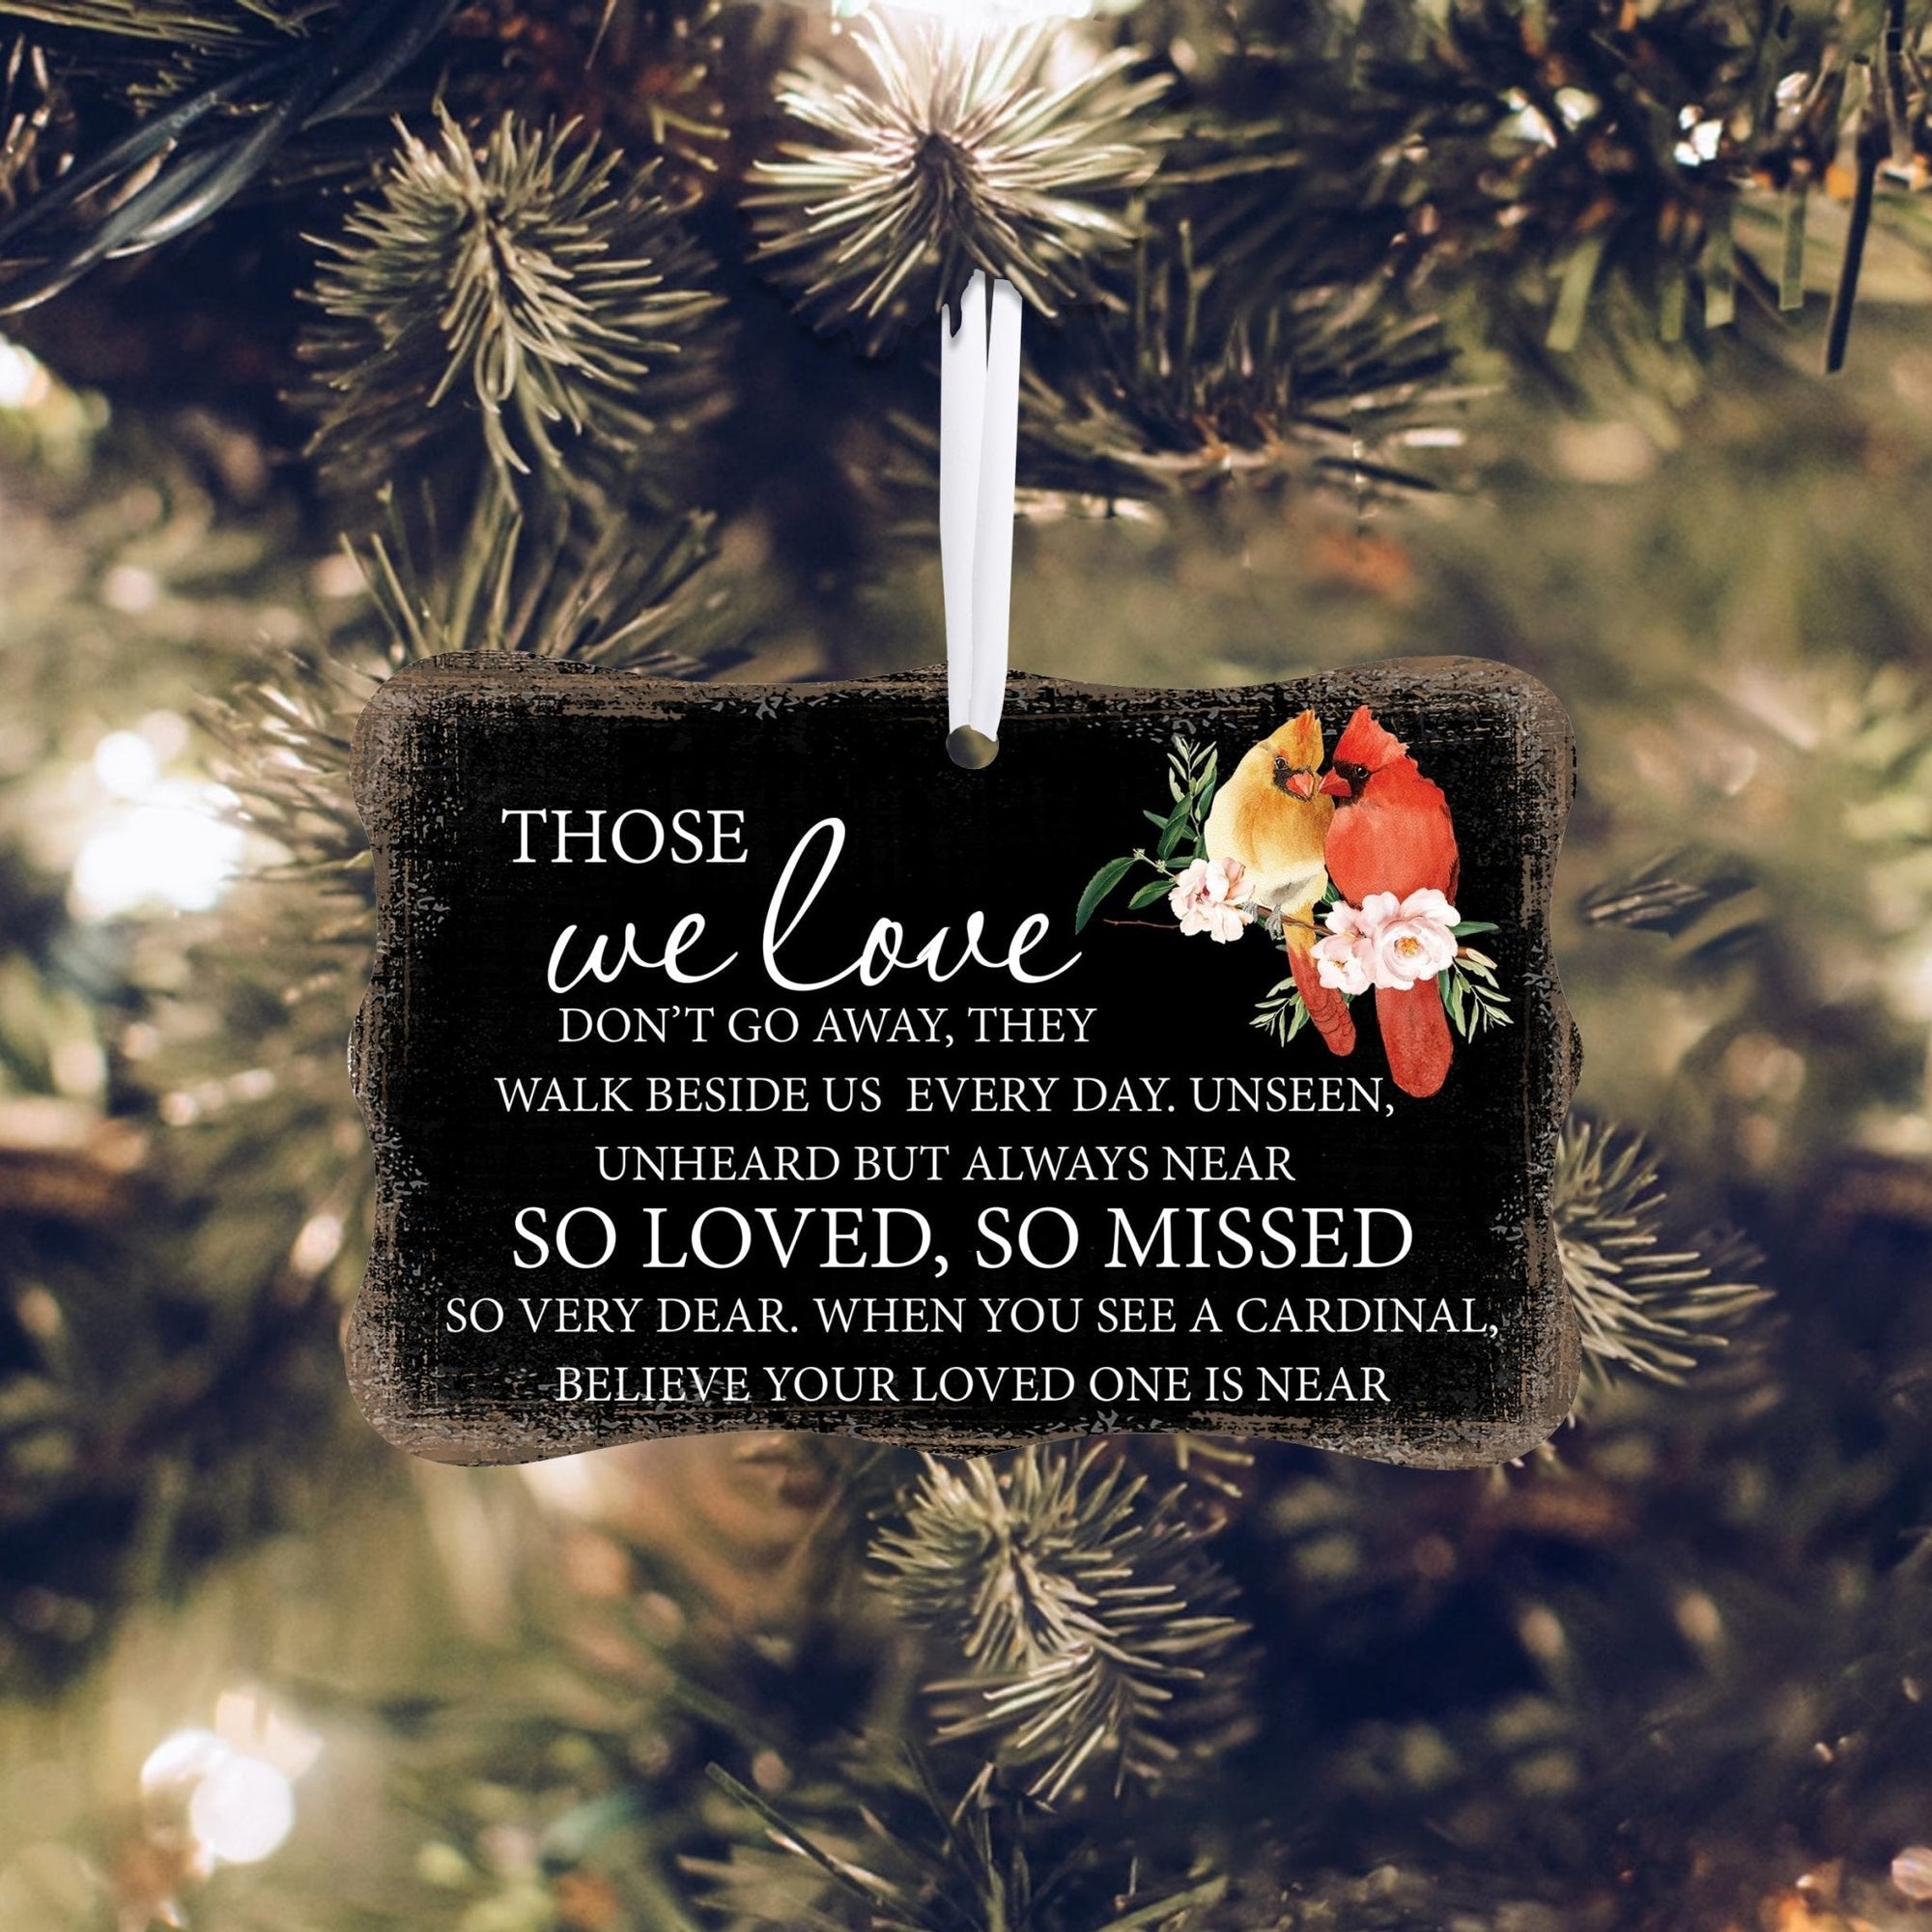 A beautifully crafted scalloped ornament sign with a memorial ribbon, perfect for honoring a loved one's memory.